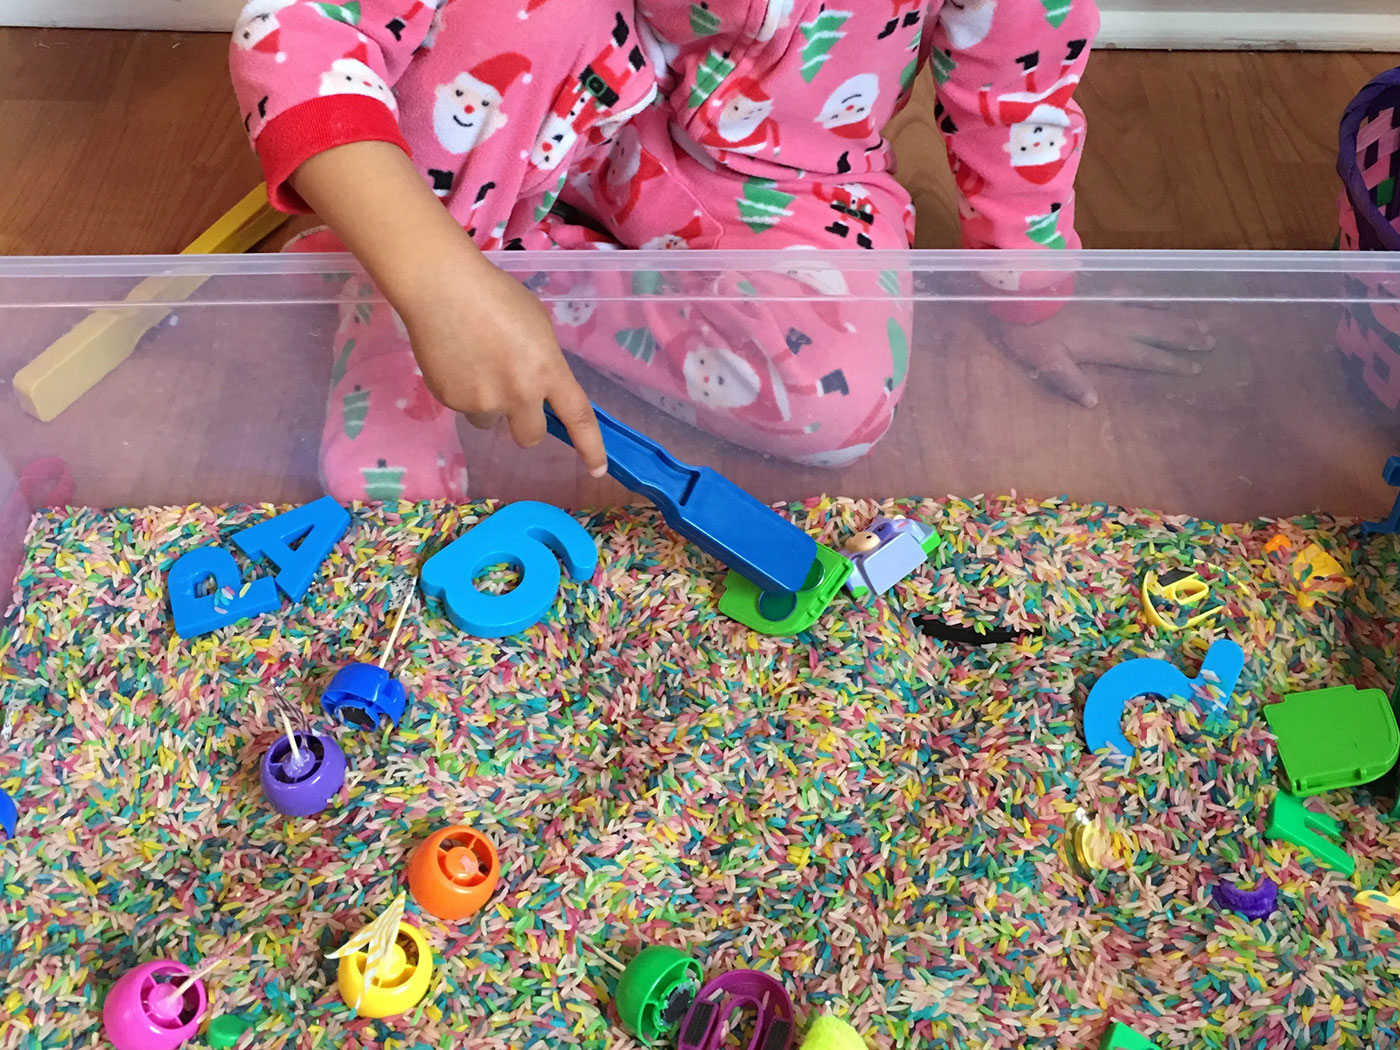 Organizing Games and Sensory Crafts in This Home School Dream